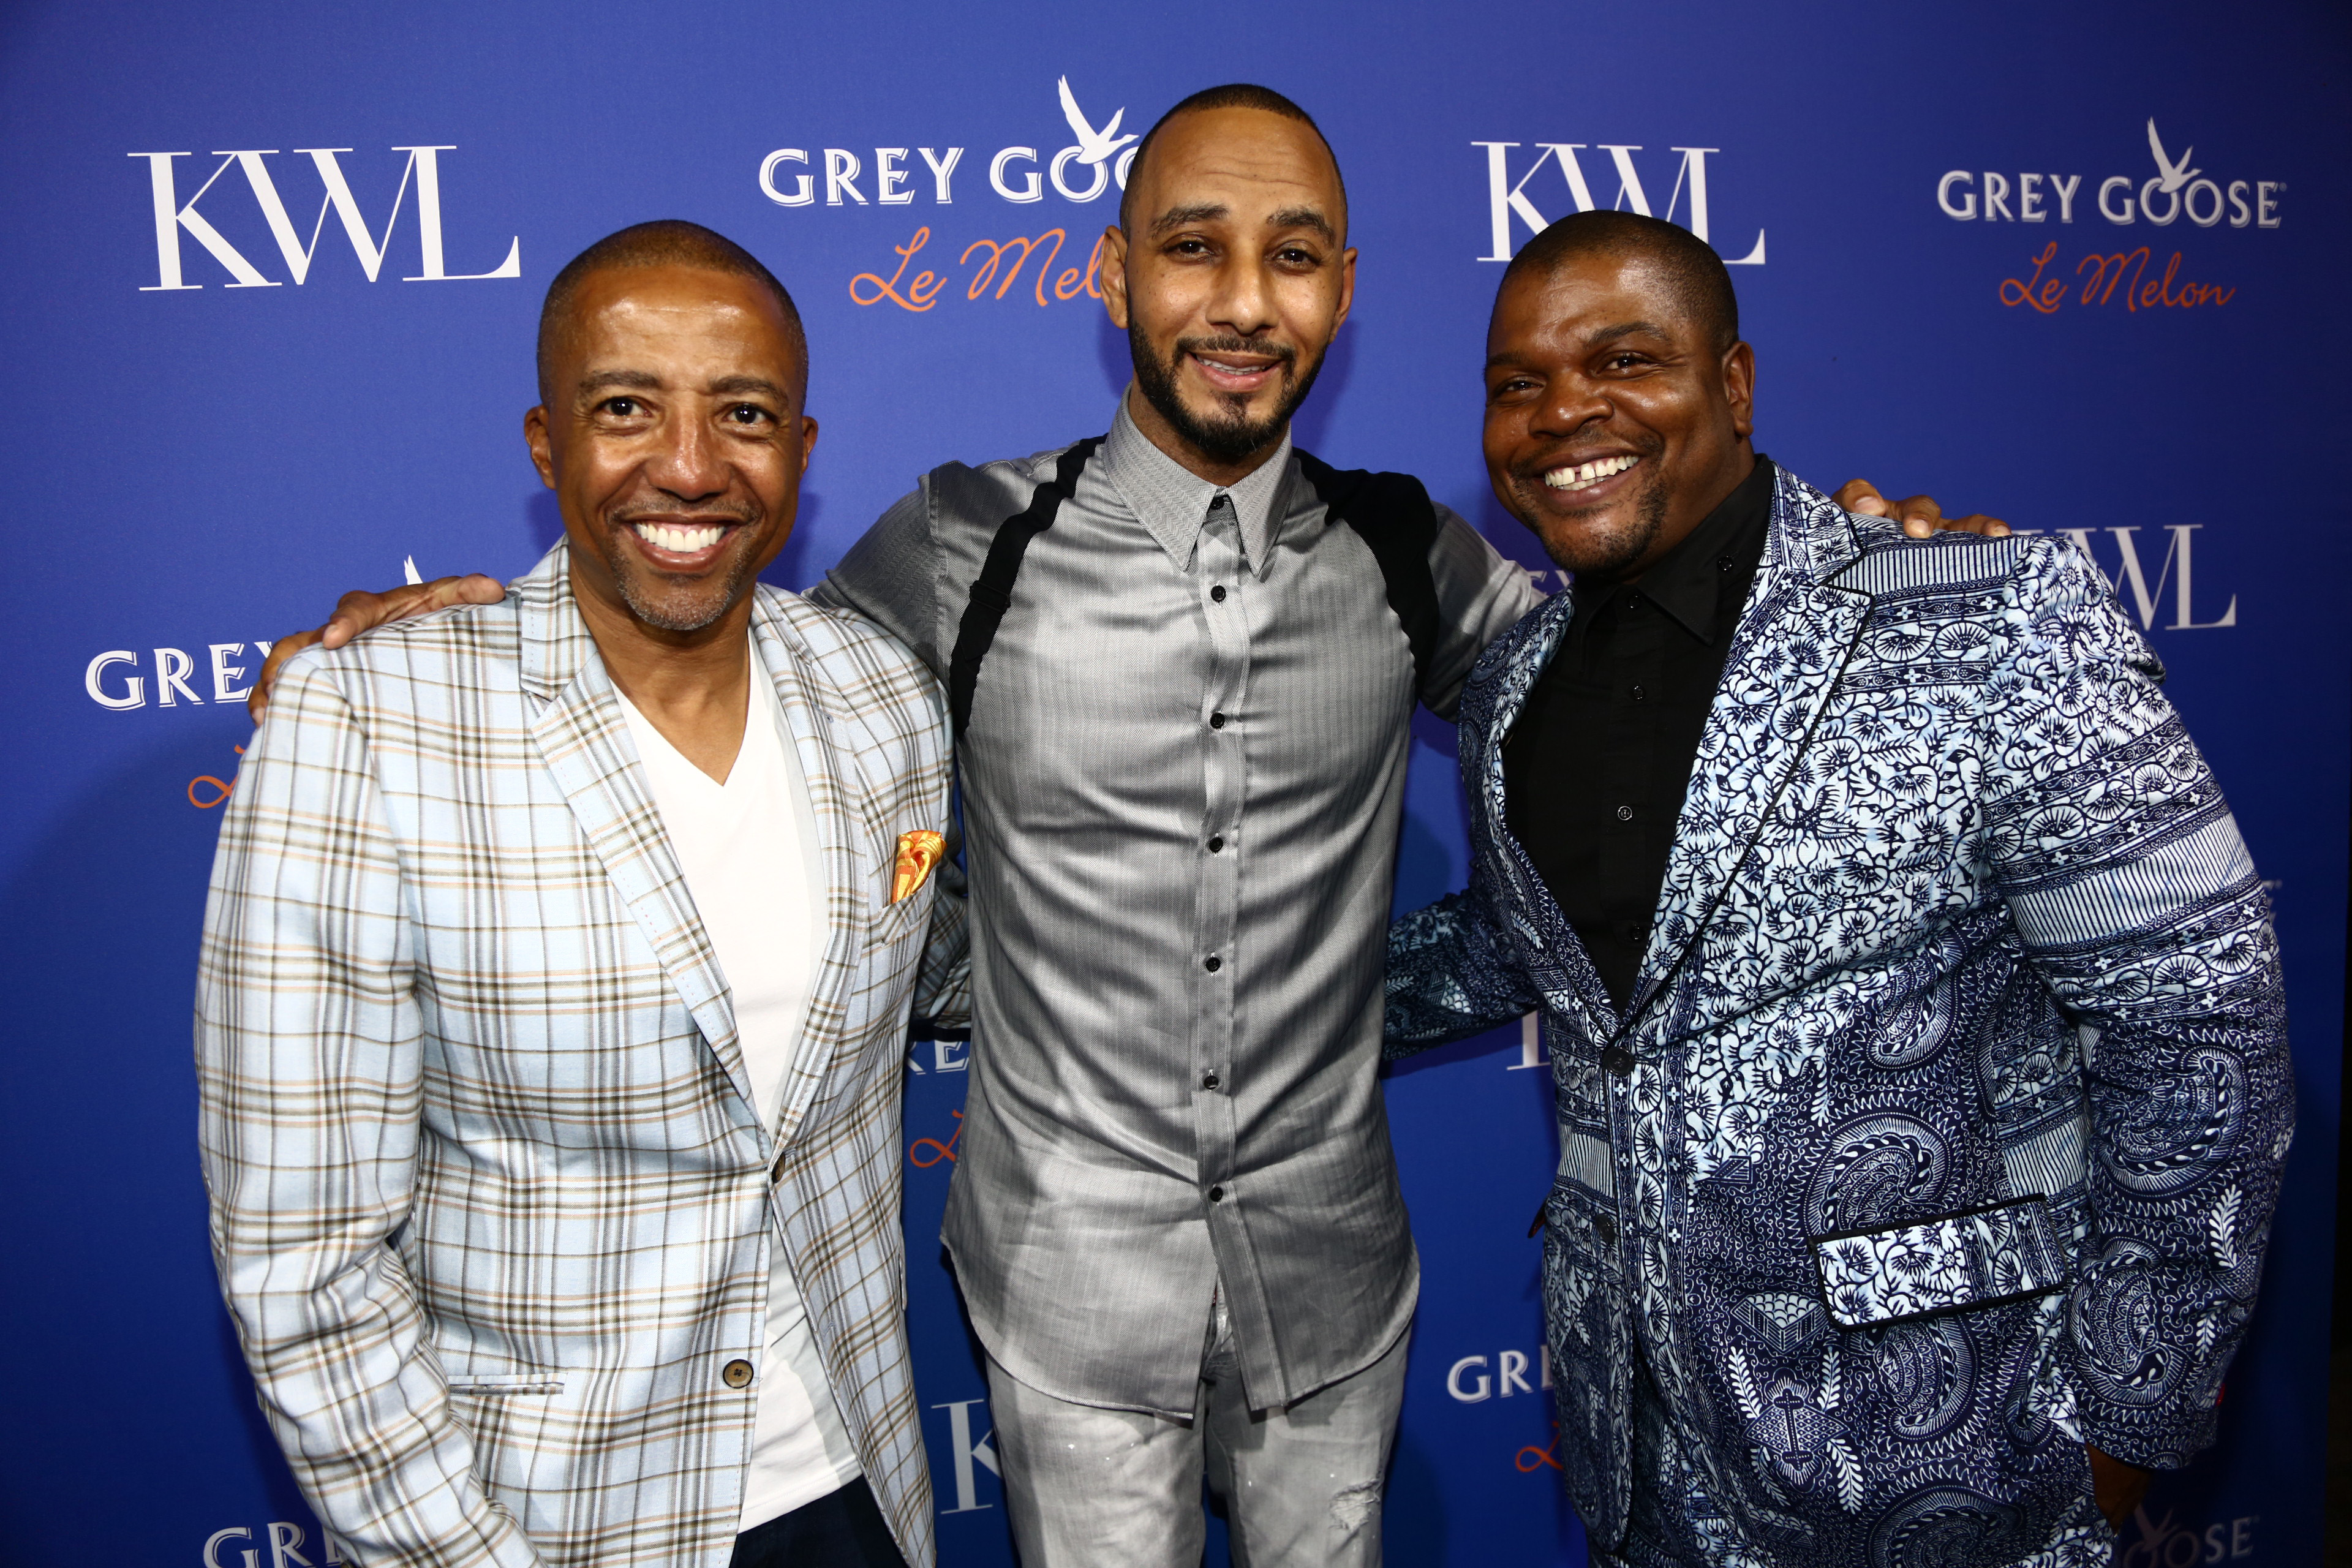 Kevin Liles Swizz Beatz and Kehinde Wiley - GREY GOOSE Le Melon Toasts Musician Swizz Beatz With Art Commissioned By Award Winning Artist Kehinde Wiley